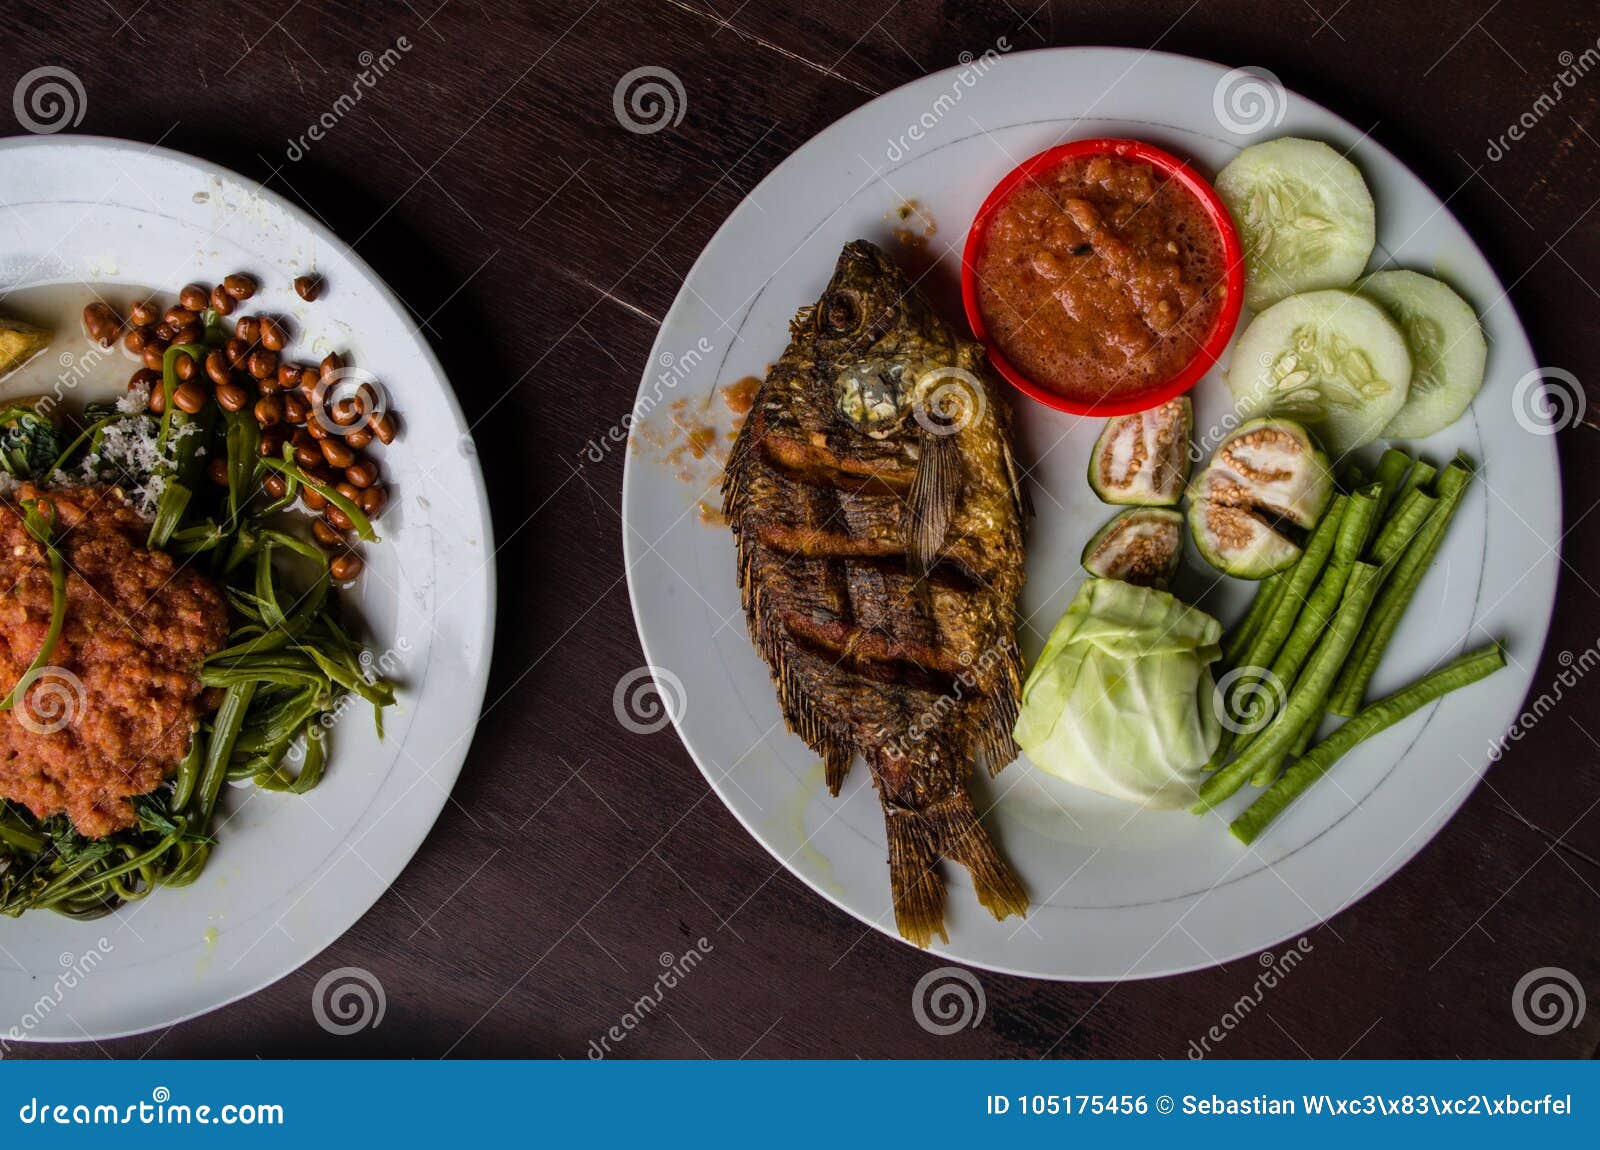 indonesian food: kankung plecing spicy water spinach dish and ikan goreng fried fish top view